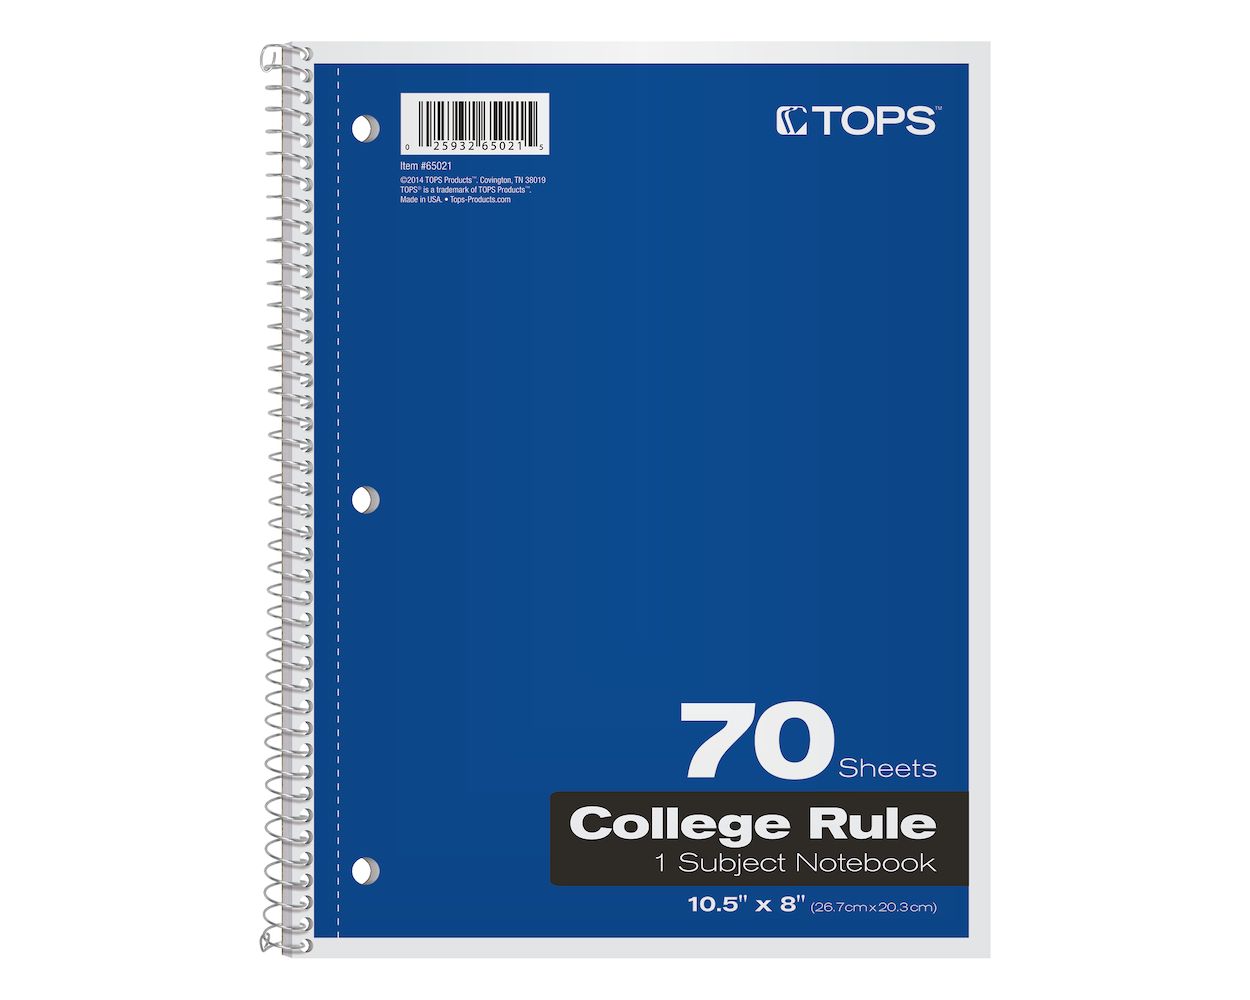 - 1 Pack of 6 College Rule 65007 8 x 10-1/2 TOPS/Oxford 1-Subject Notebooks Color Assortment May Vary 6 Pack 70 Sheets 